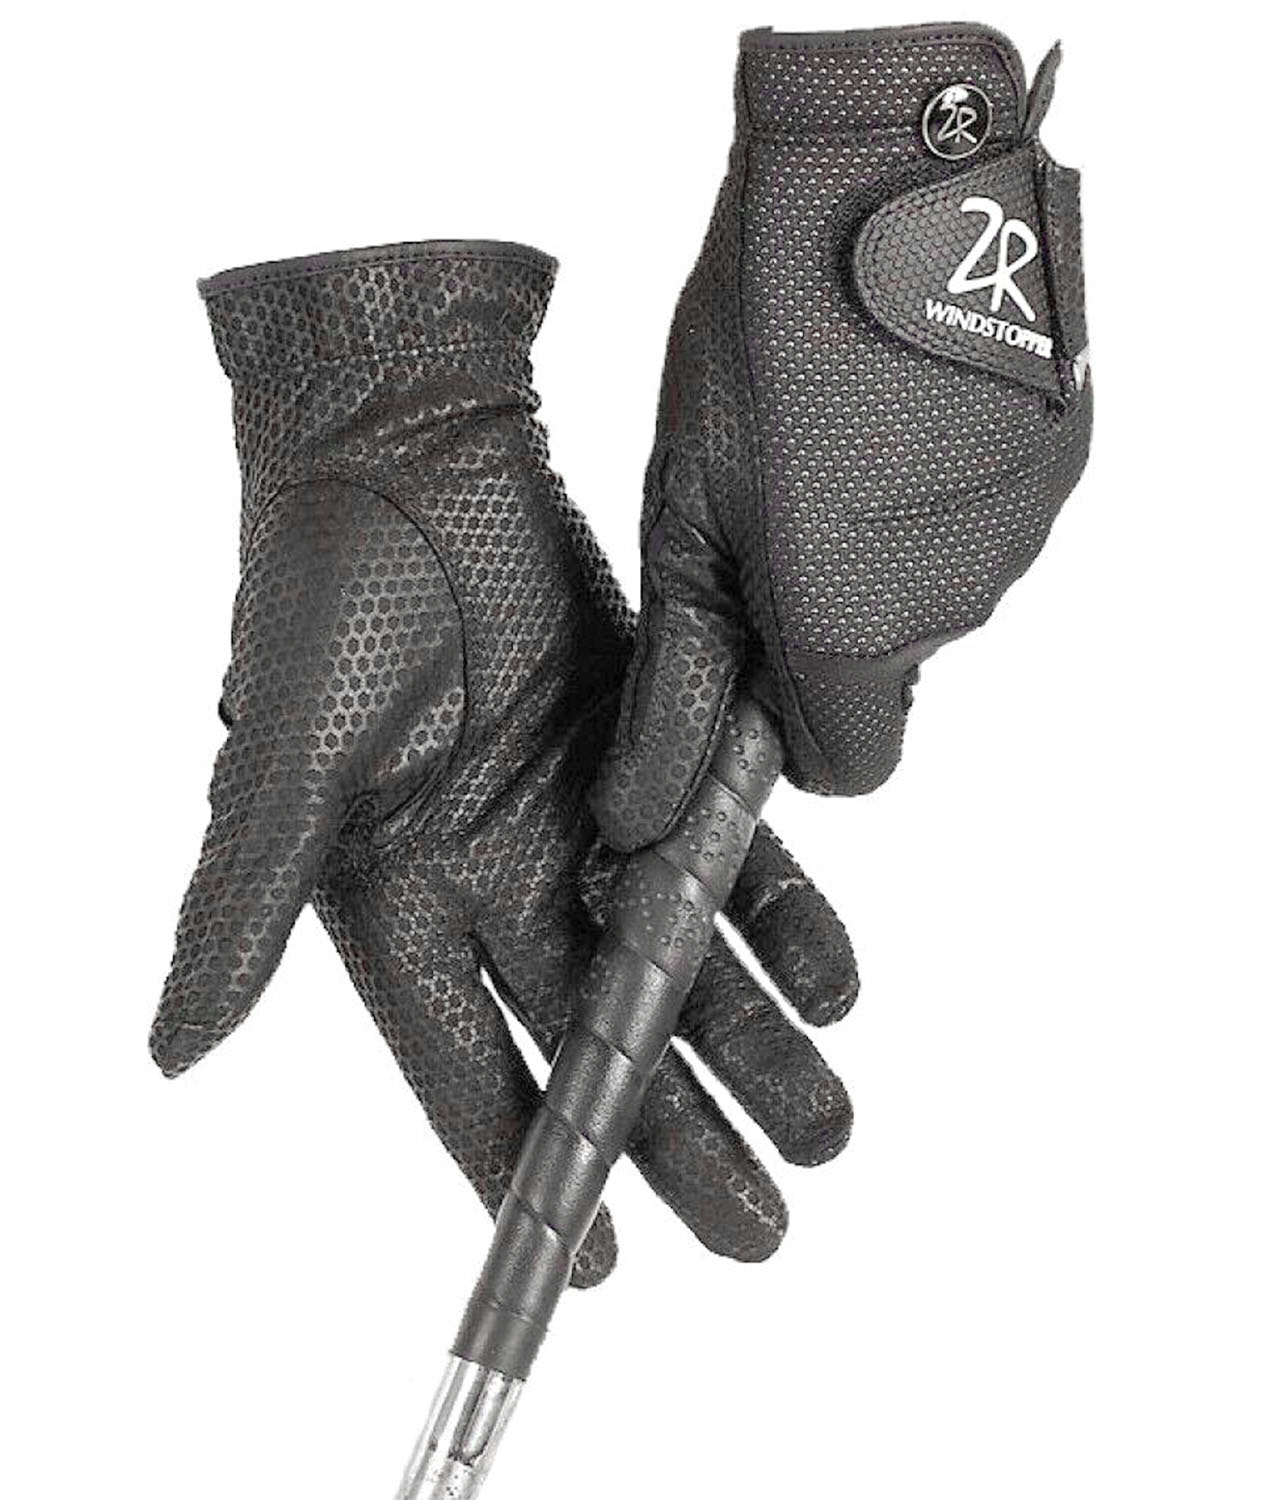 The windstopper gloves from Zero Restriction